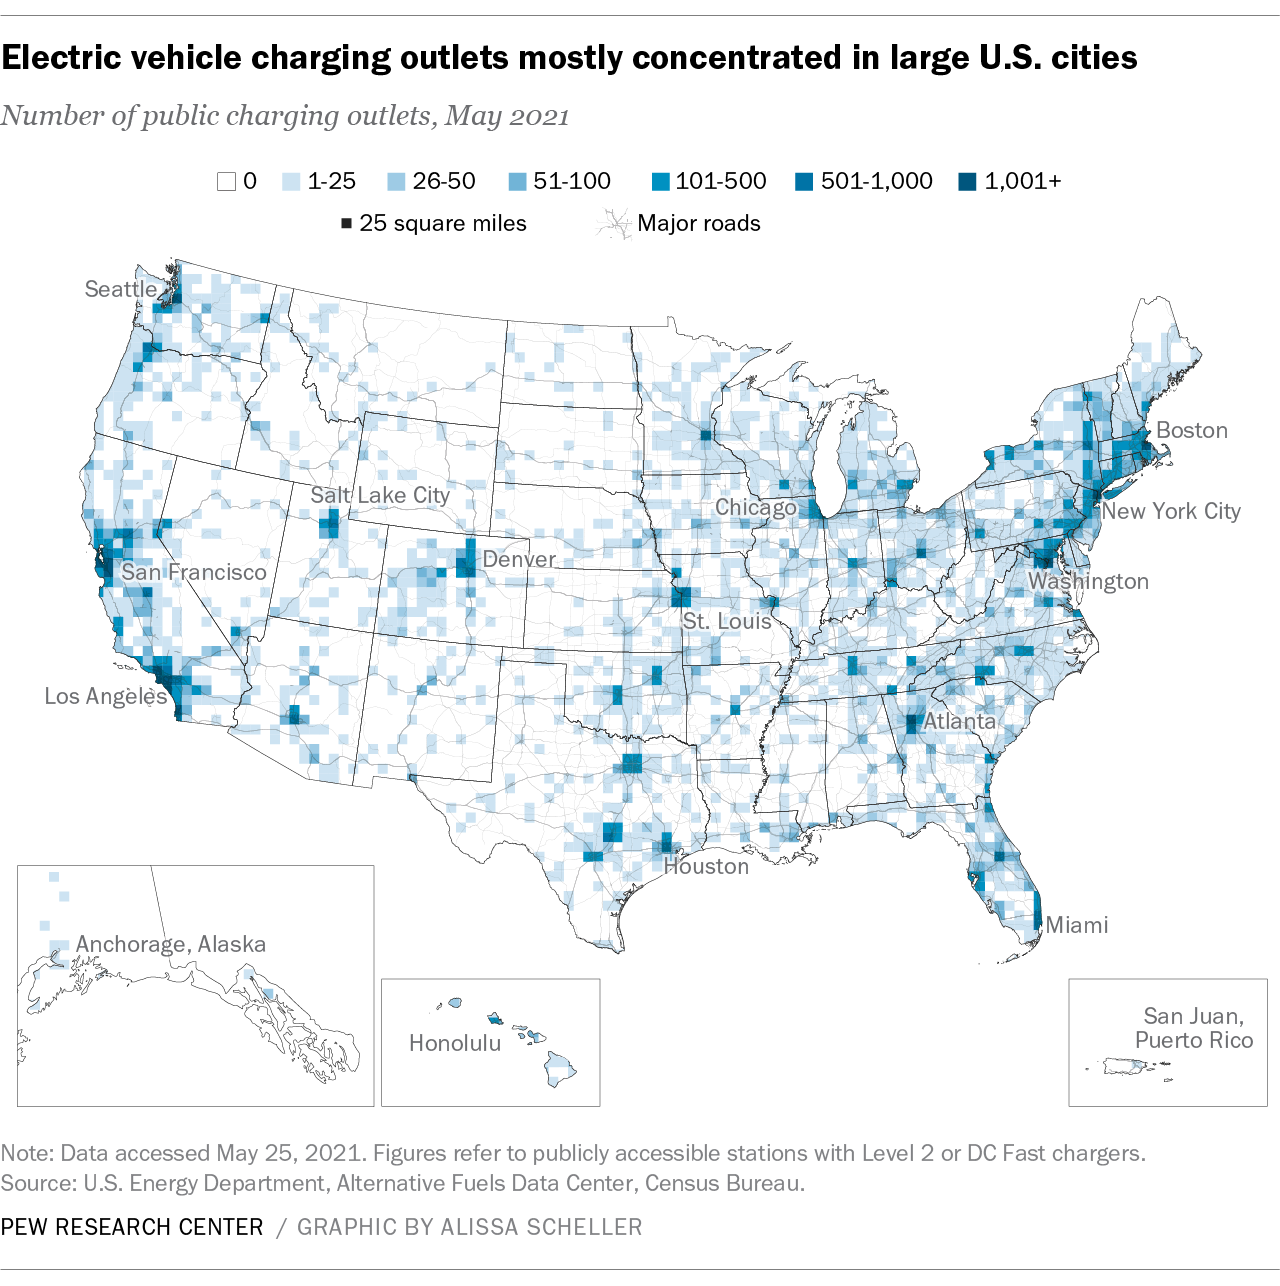 EV charging outlets are mostly concentrated in large US cities. This is a map showing the number of public charging outlets across the US as of May 2021.